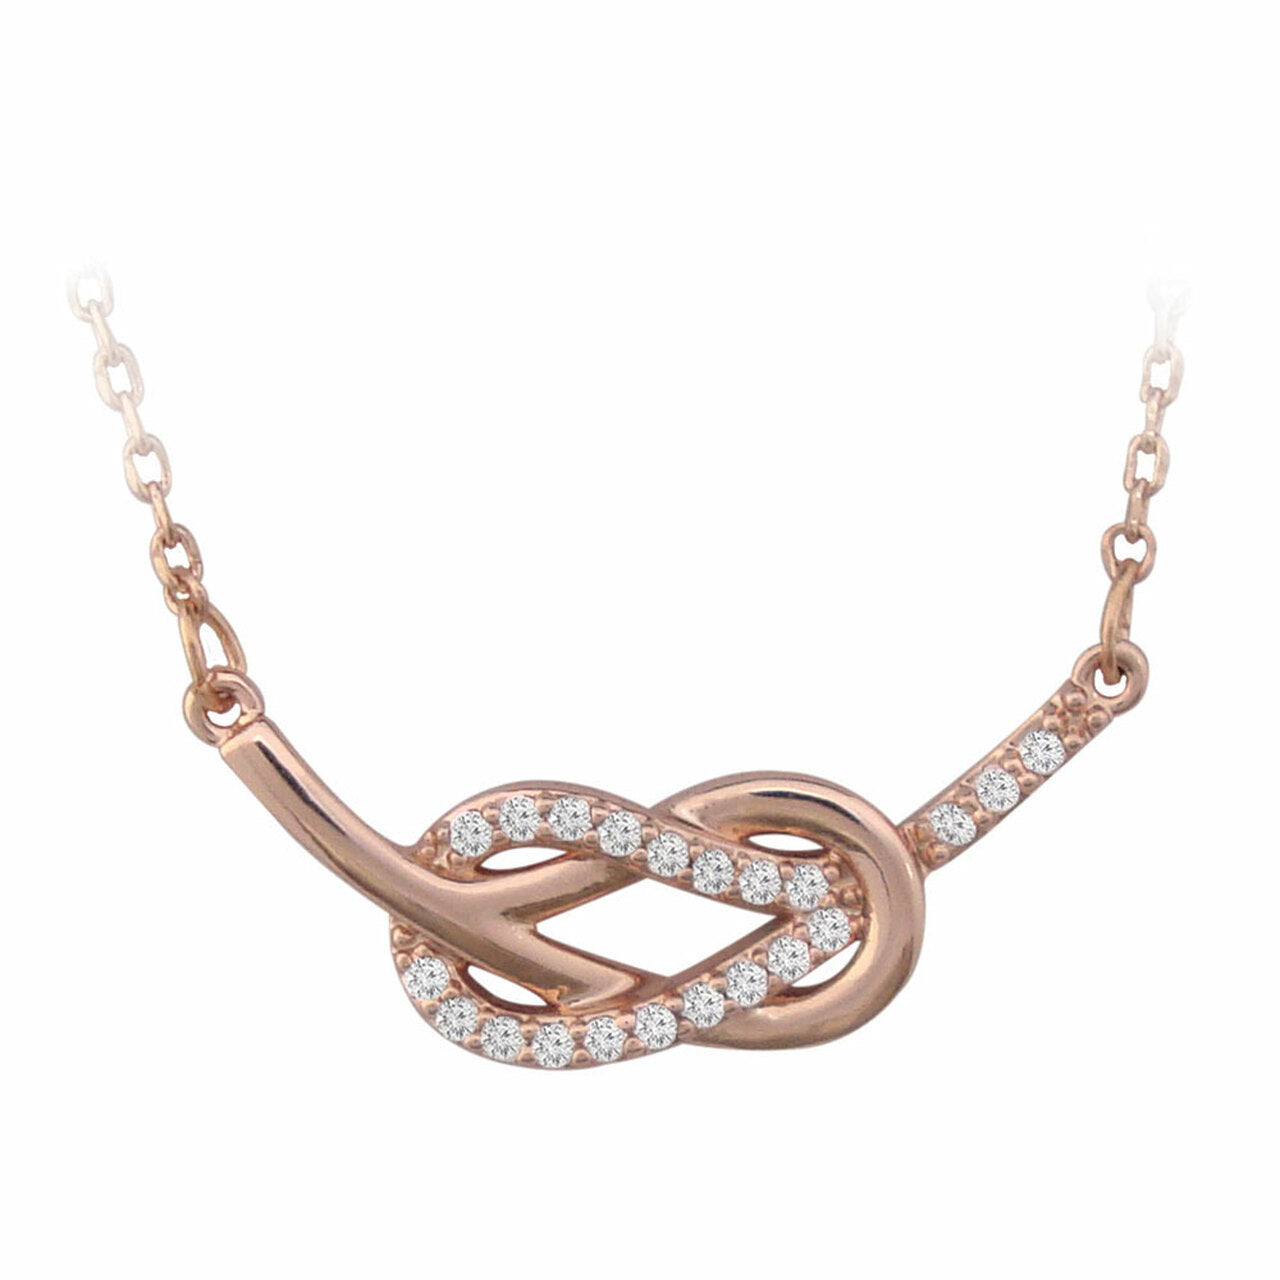 Tipperary Crystal Rose Double Swirl Hammock Pendant  Expertly crafted in rose gold, this dimensional look features two interlocking loops joined harmoniously resulting in a stylish hammock shaped design. The necklace features one sleek polished loop entwined with a second one completely lined with clear crystal accents.